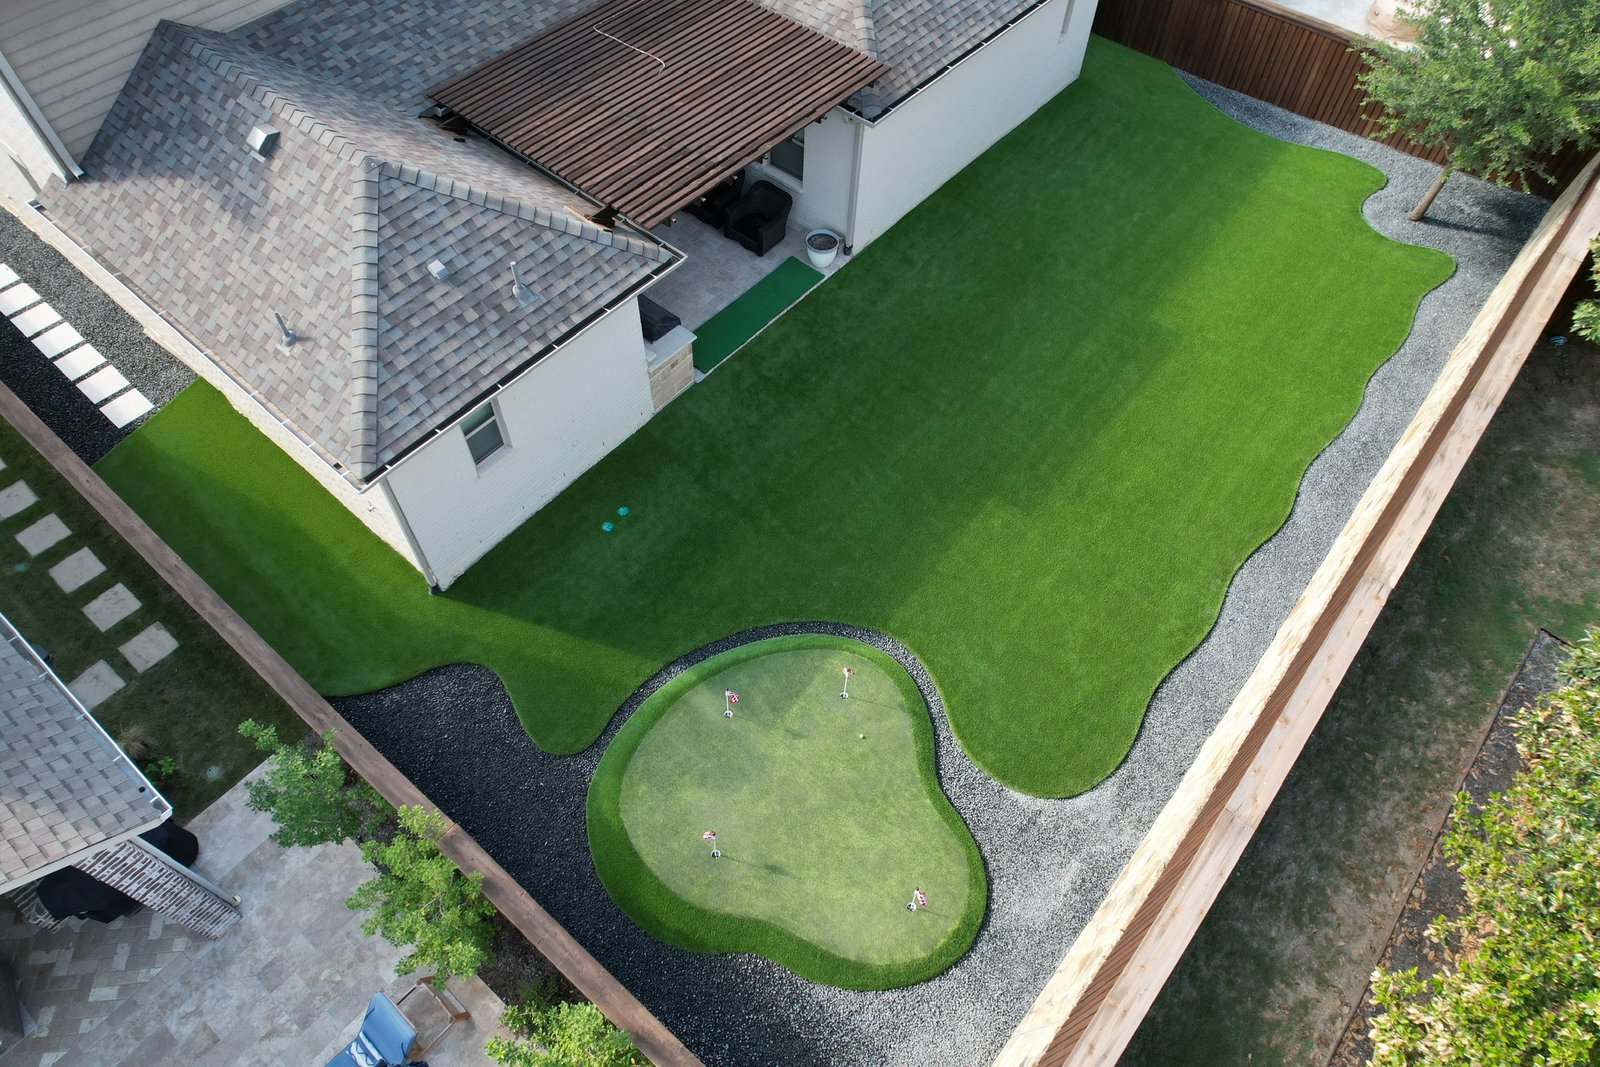 Aerial view of a residential backyard with custom-designed artificial grass, including a mini-golf green with a sand trap, surrounded by a wooden fence and adjacent to a home with a covered patio.